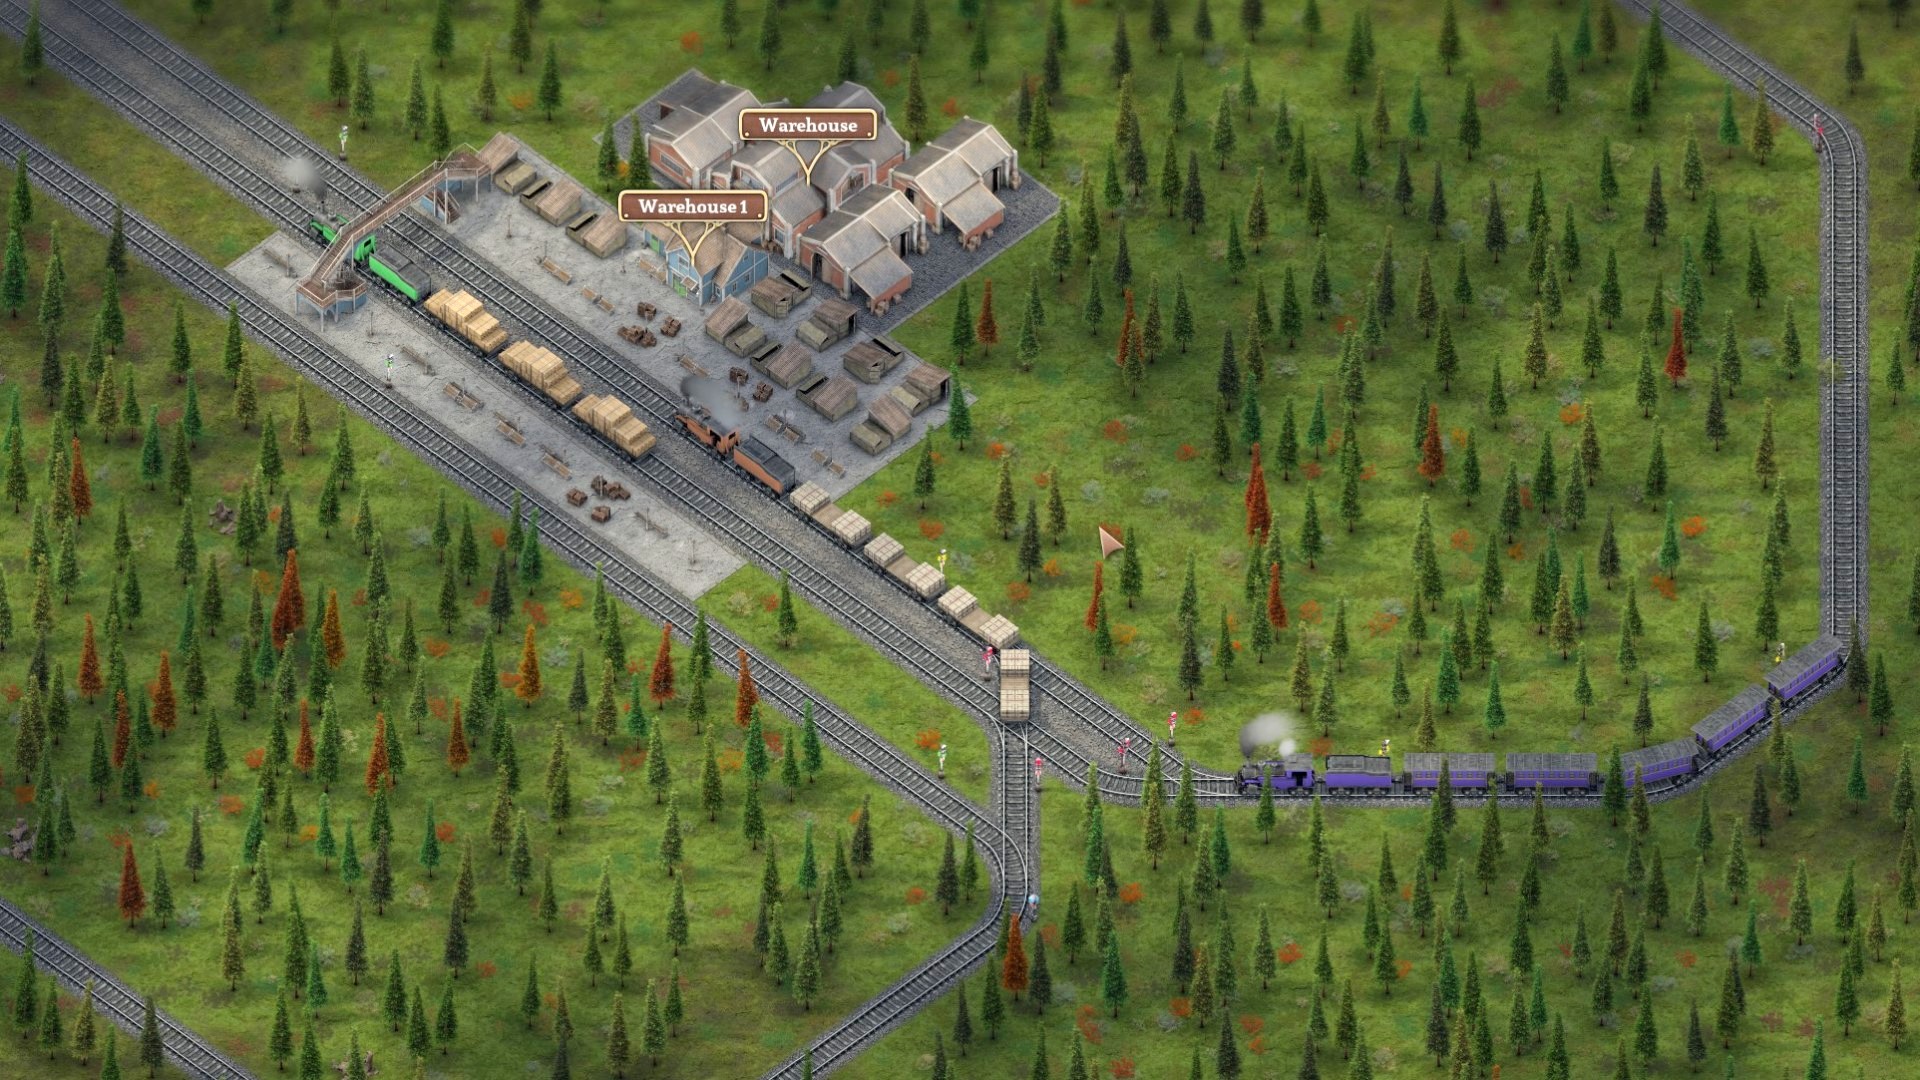 Sweet Transit, a train game with Factorio roots, hits Early Access